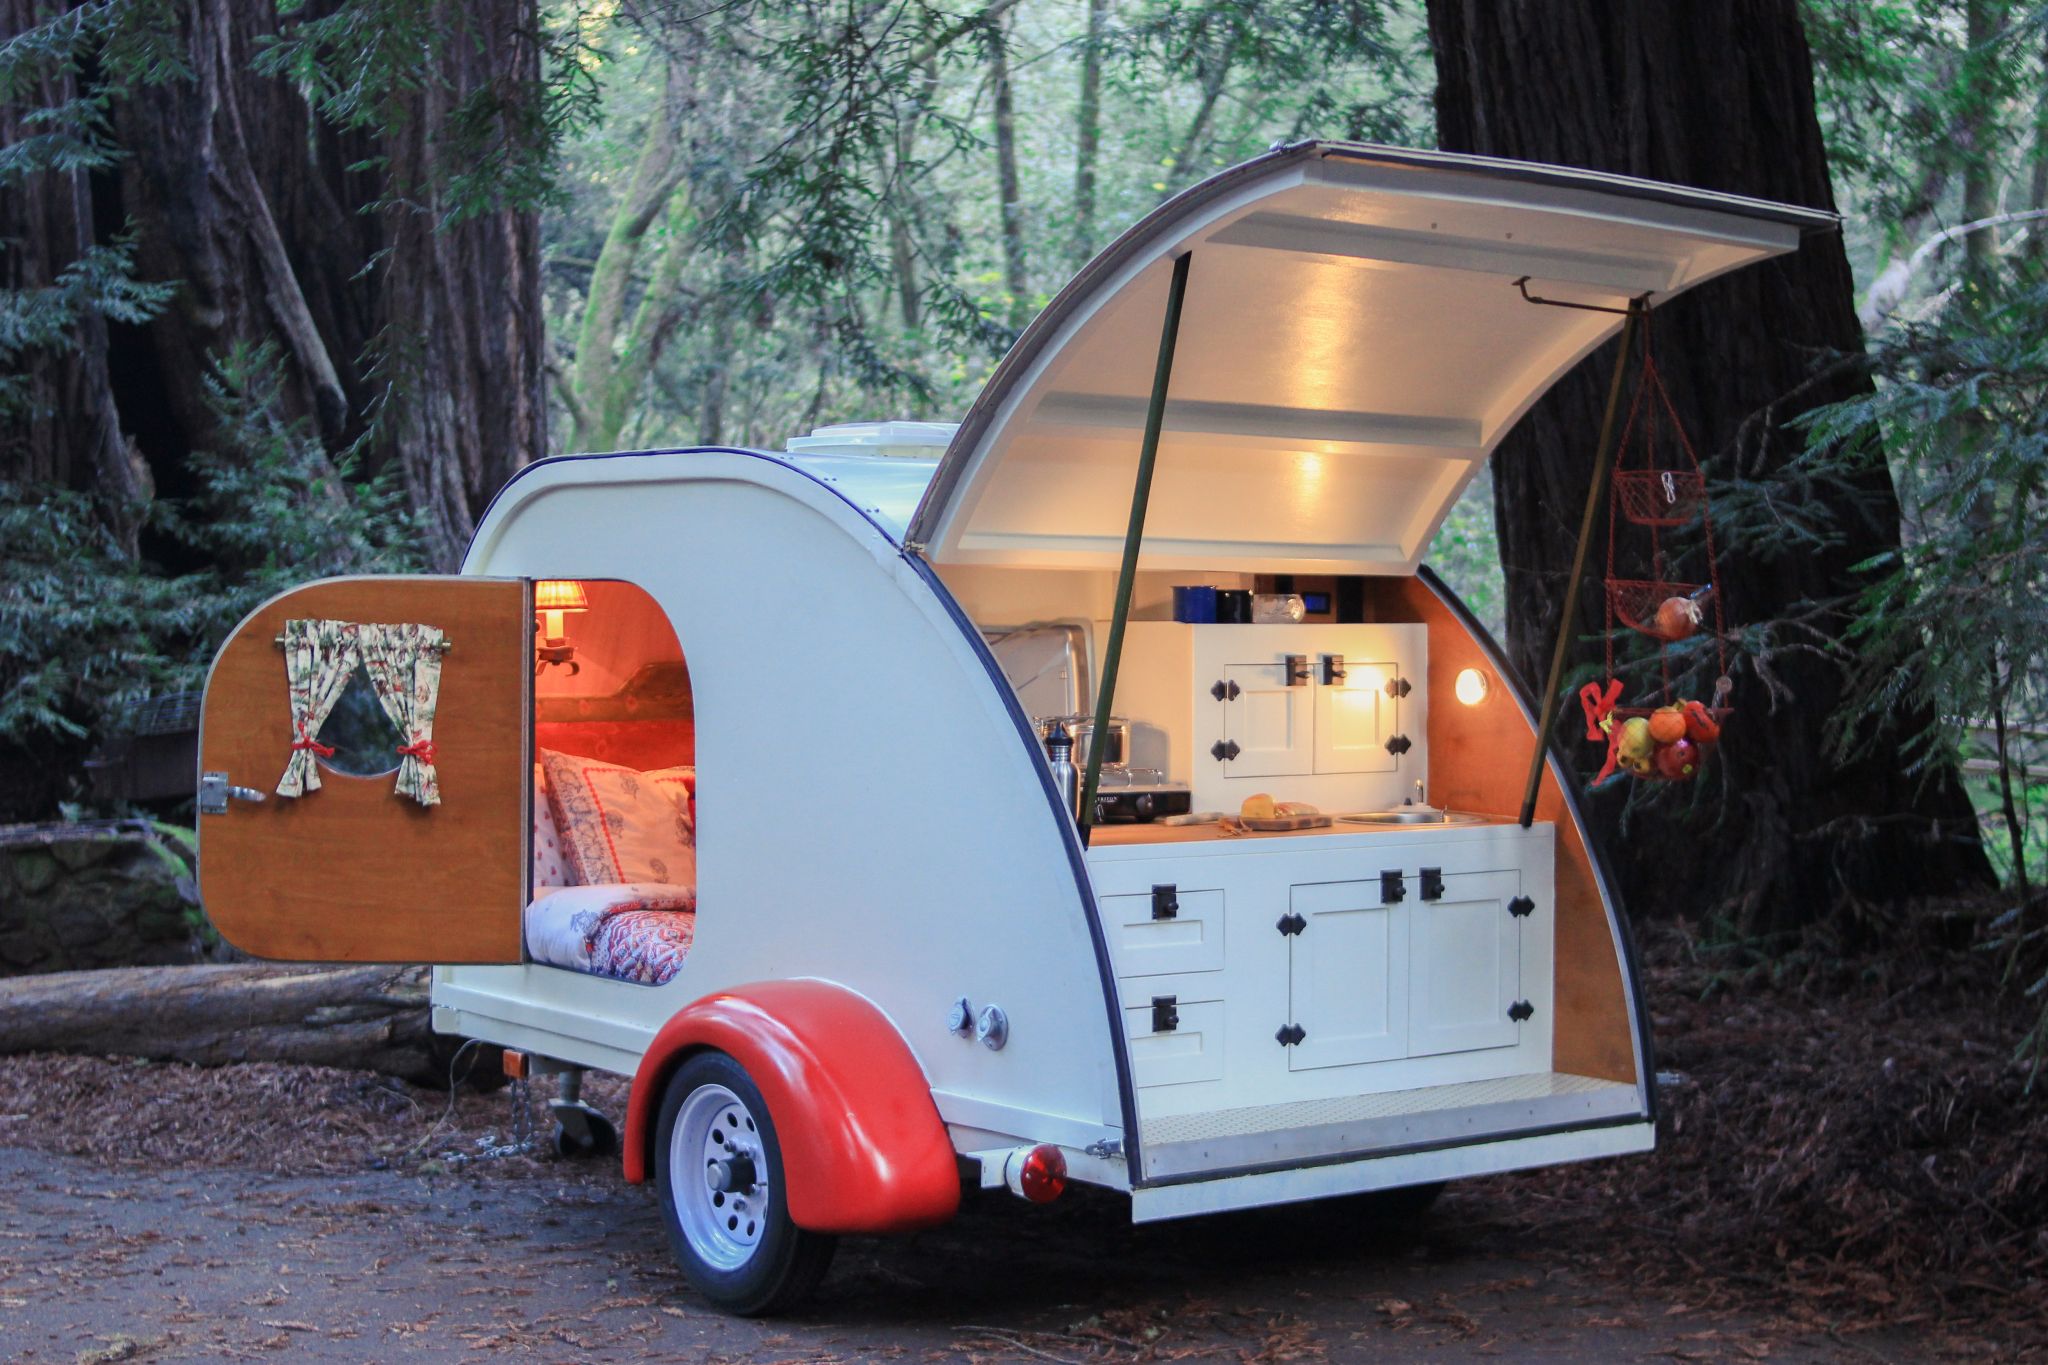 The Millennials Tent This Vintage Trailer Is Making A Comeback For